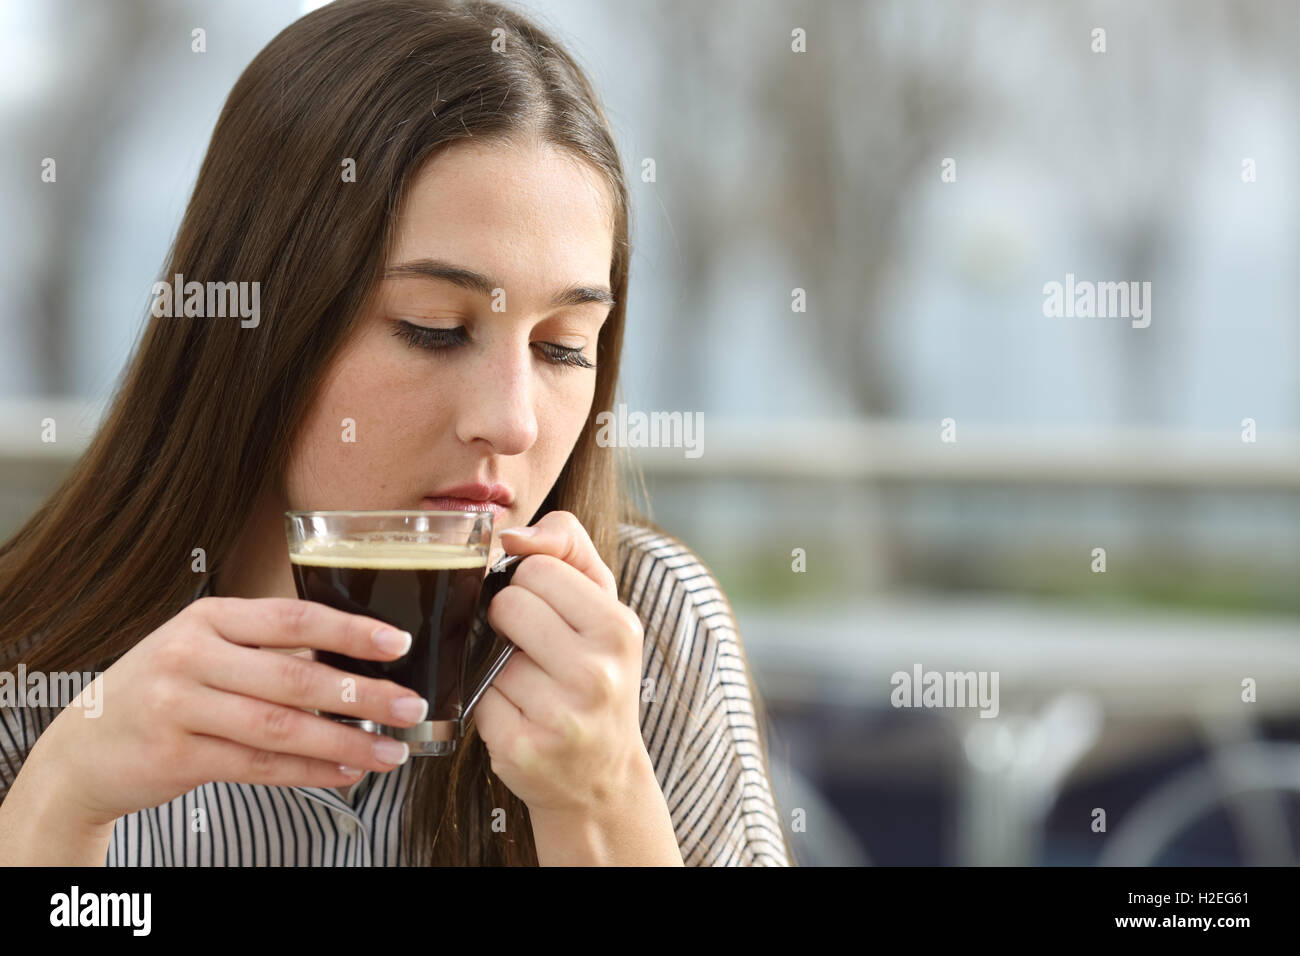 Portrait of a sad woman holding a coffee cup thinking and looking down sitting in a restaurant in a rainy day Stock Photo